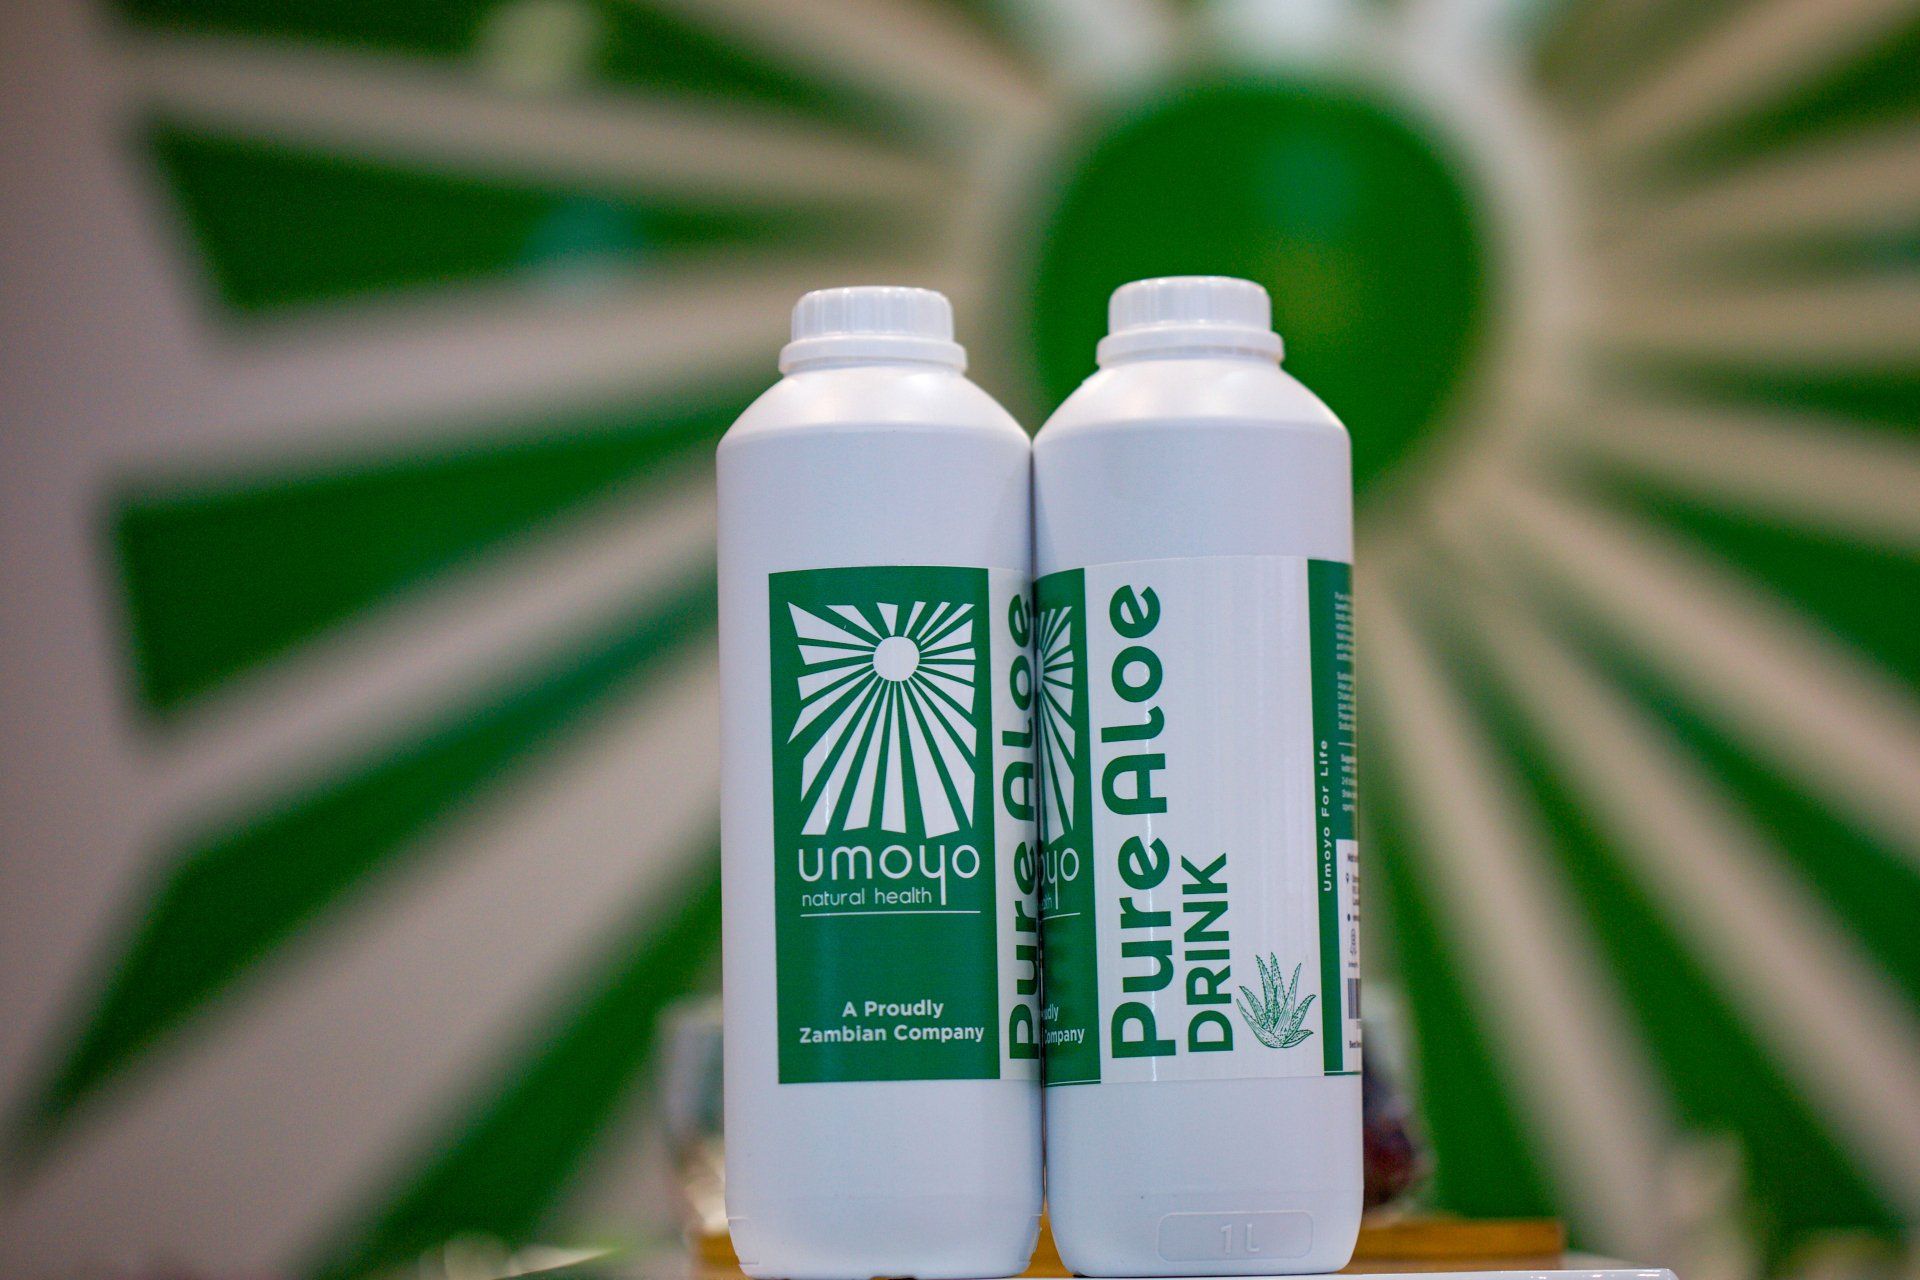 Two bottles of pure aloe drink are sitting on a table.